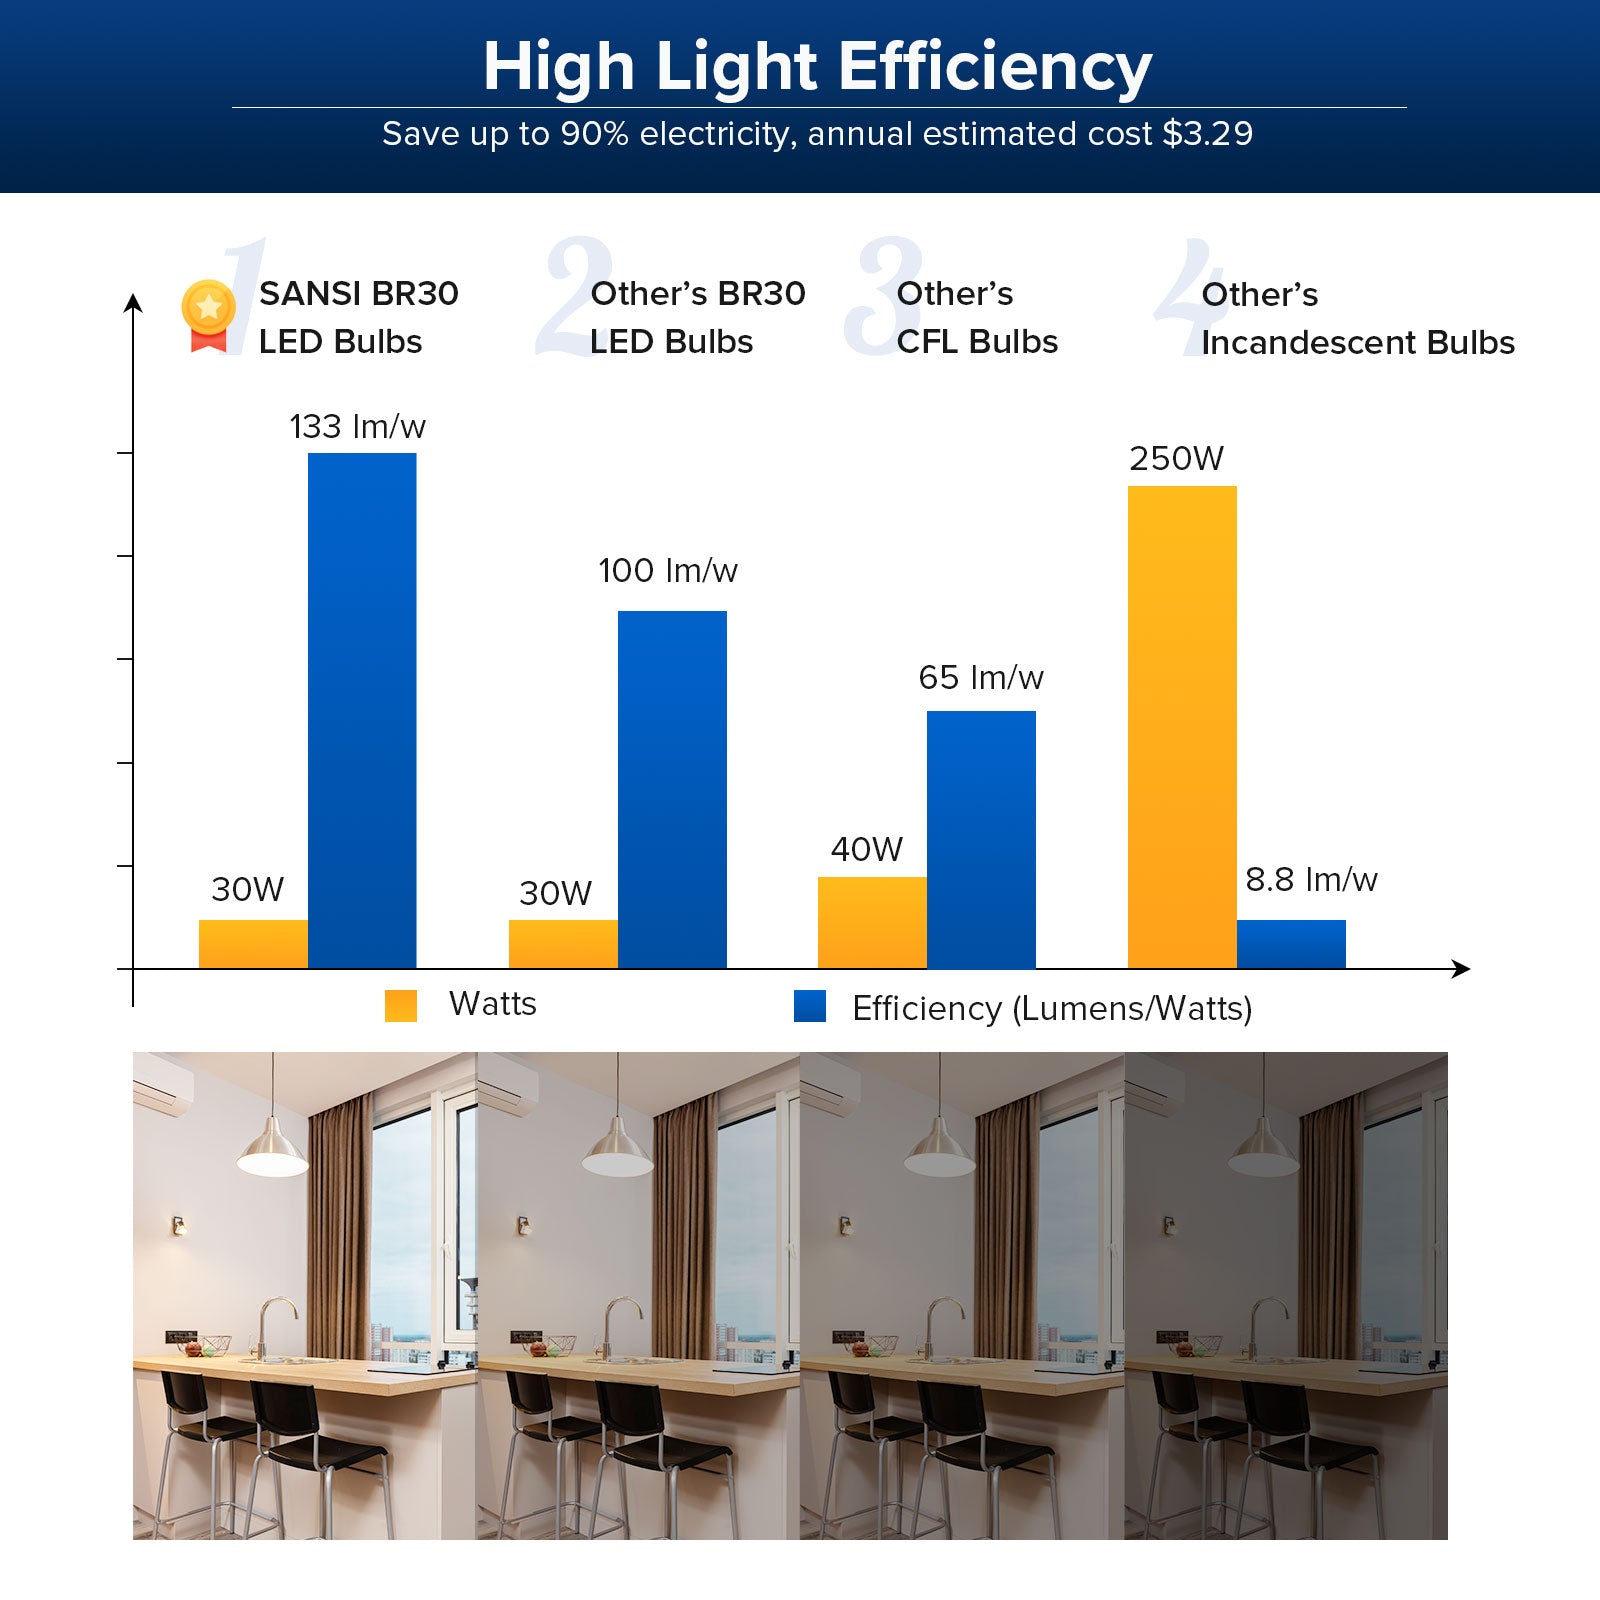 BR30 30W LED Light Bulb(US ONLY) has high light efficiency，save up to 90% electricity, annual estimated cost $3.29.